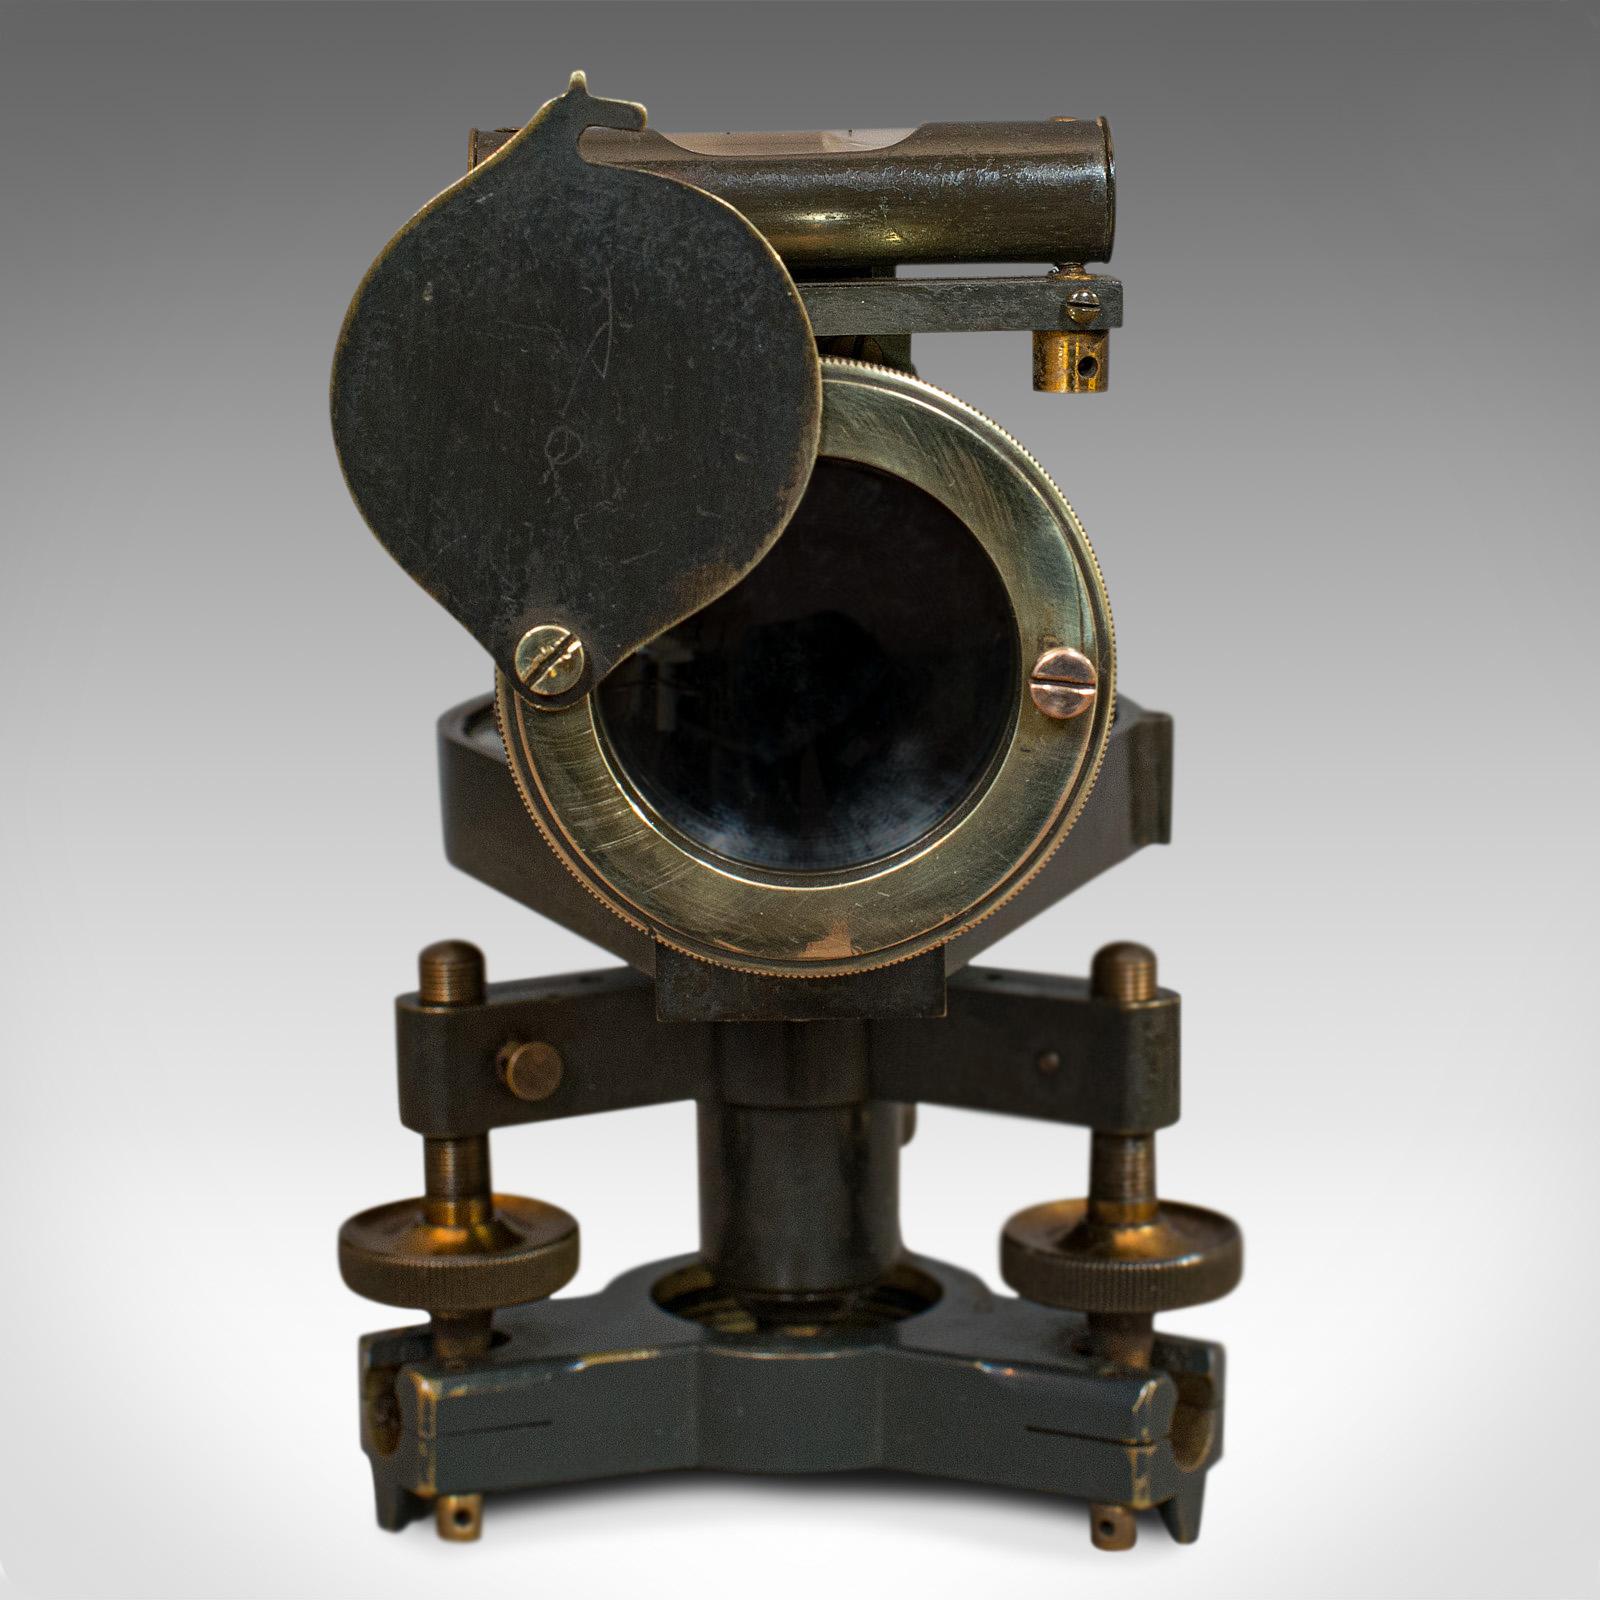 This is an antique surveyor's level. An English, brass theodolite desk ornament by William Stanley with mahogany carry box, dating to the early 20th century, circa 1910.

A Fine scientific instrument from a renowned designer
Displays a desirable